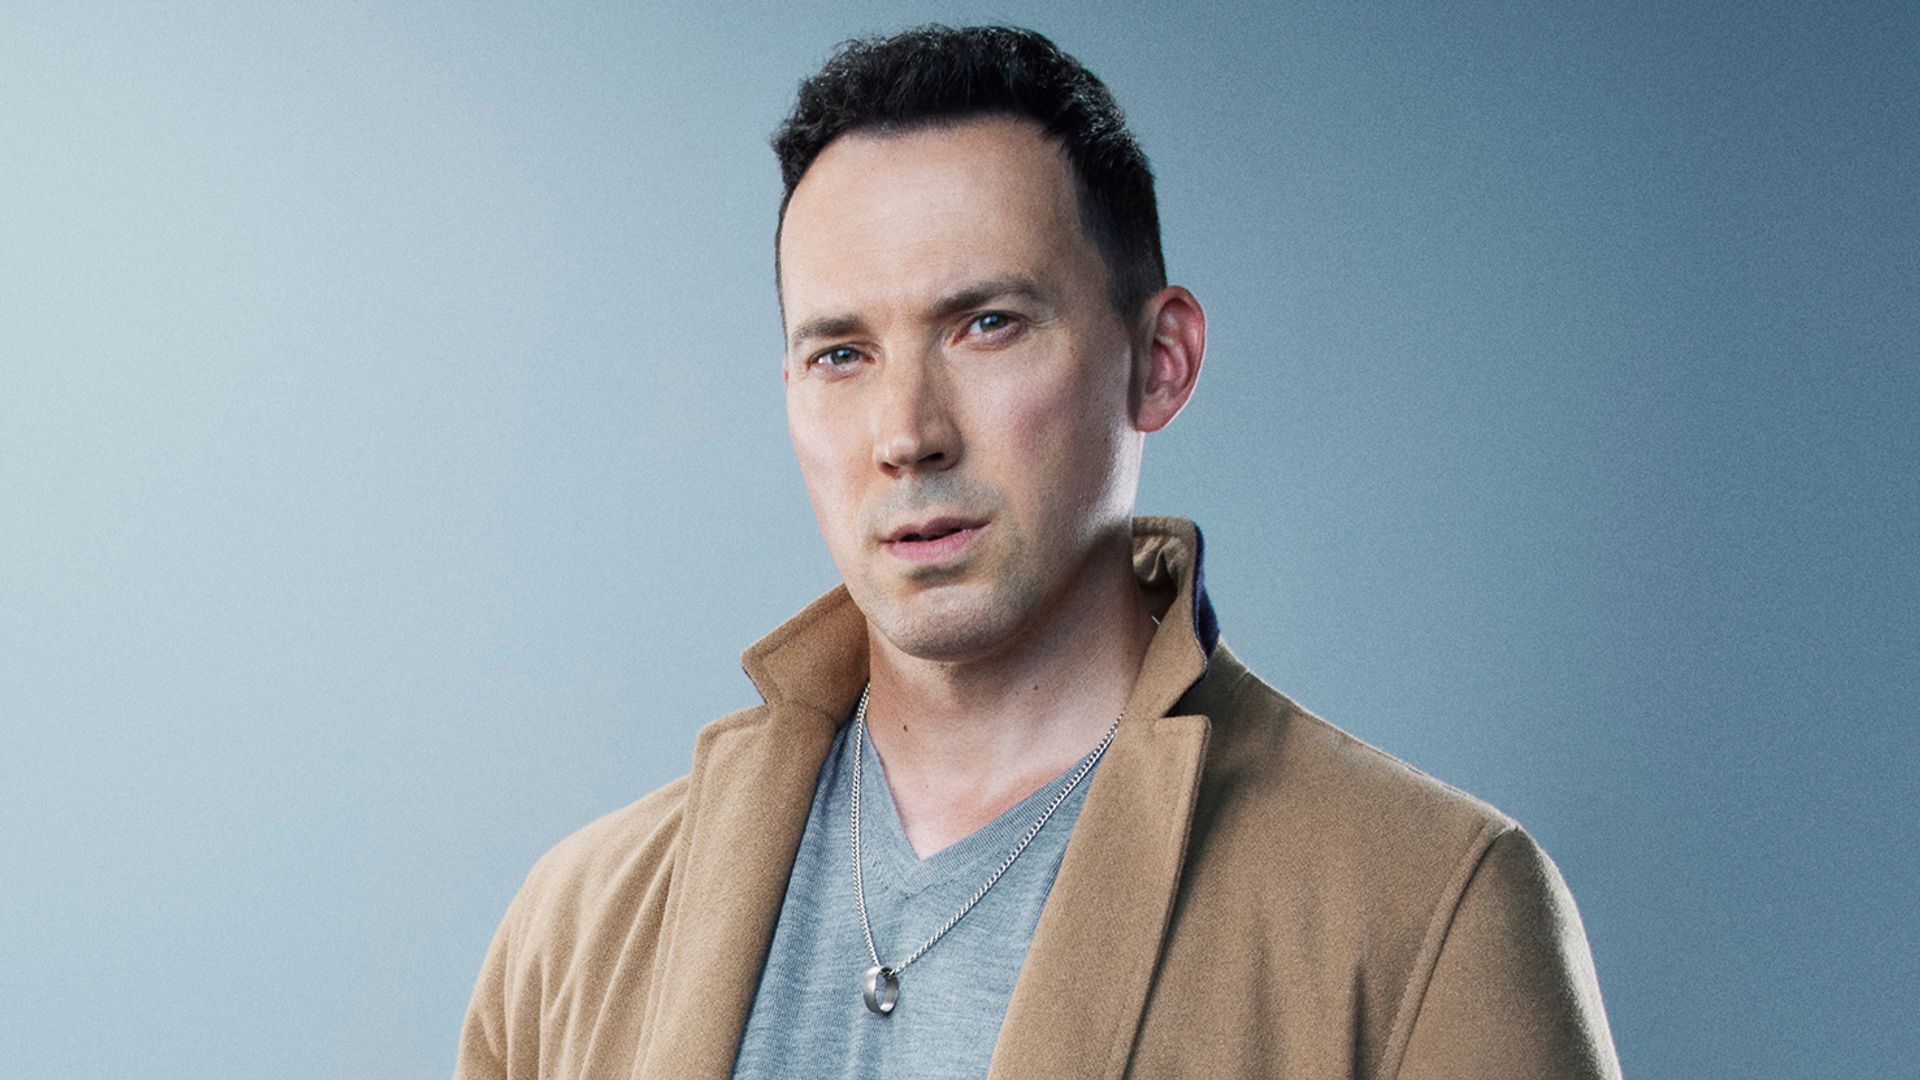 Silent Witness star David Caves' home and family life explored